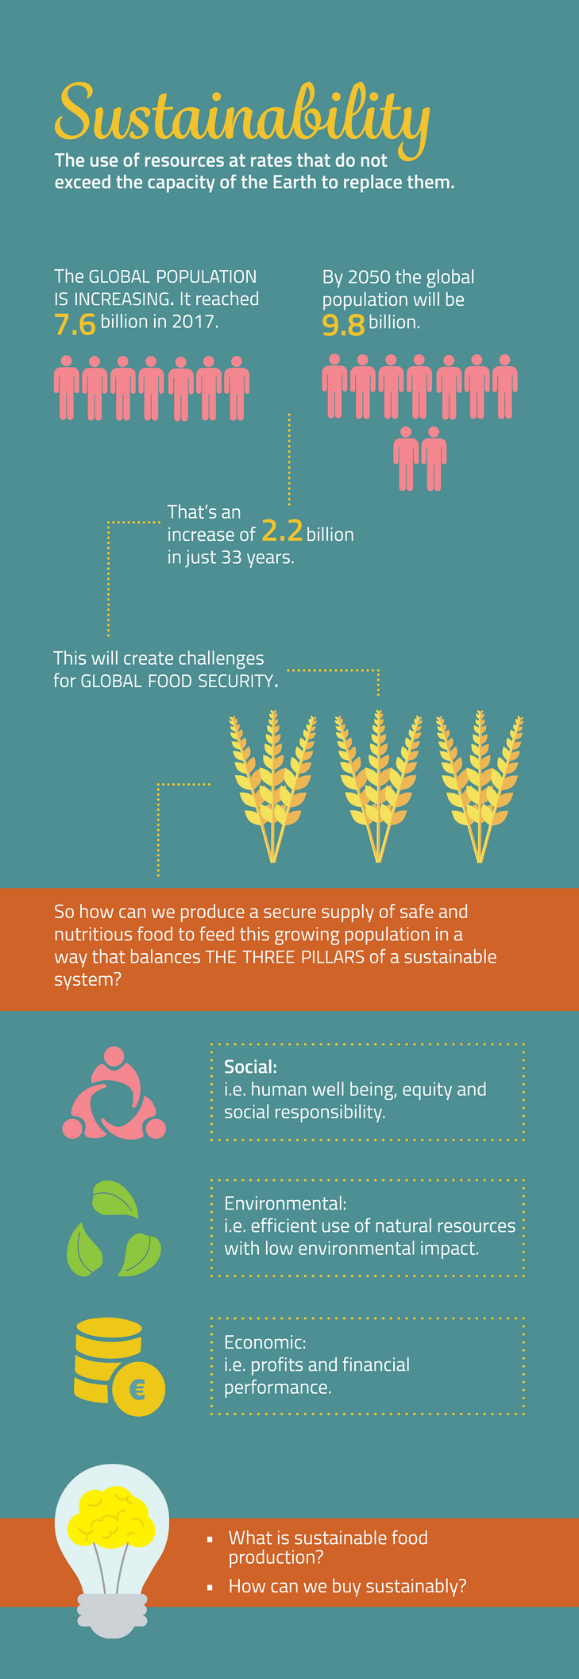 Infographic defining sustainability as the use of resources at rates that do not exceed the capacity of the earth to replace them. It shows the global population increasing by 2.2 billion people by 2050 challenging global security. It asks how we can produce a secure supply of nutritious food in a way that balances the three pillars: social, environmental and economic.